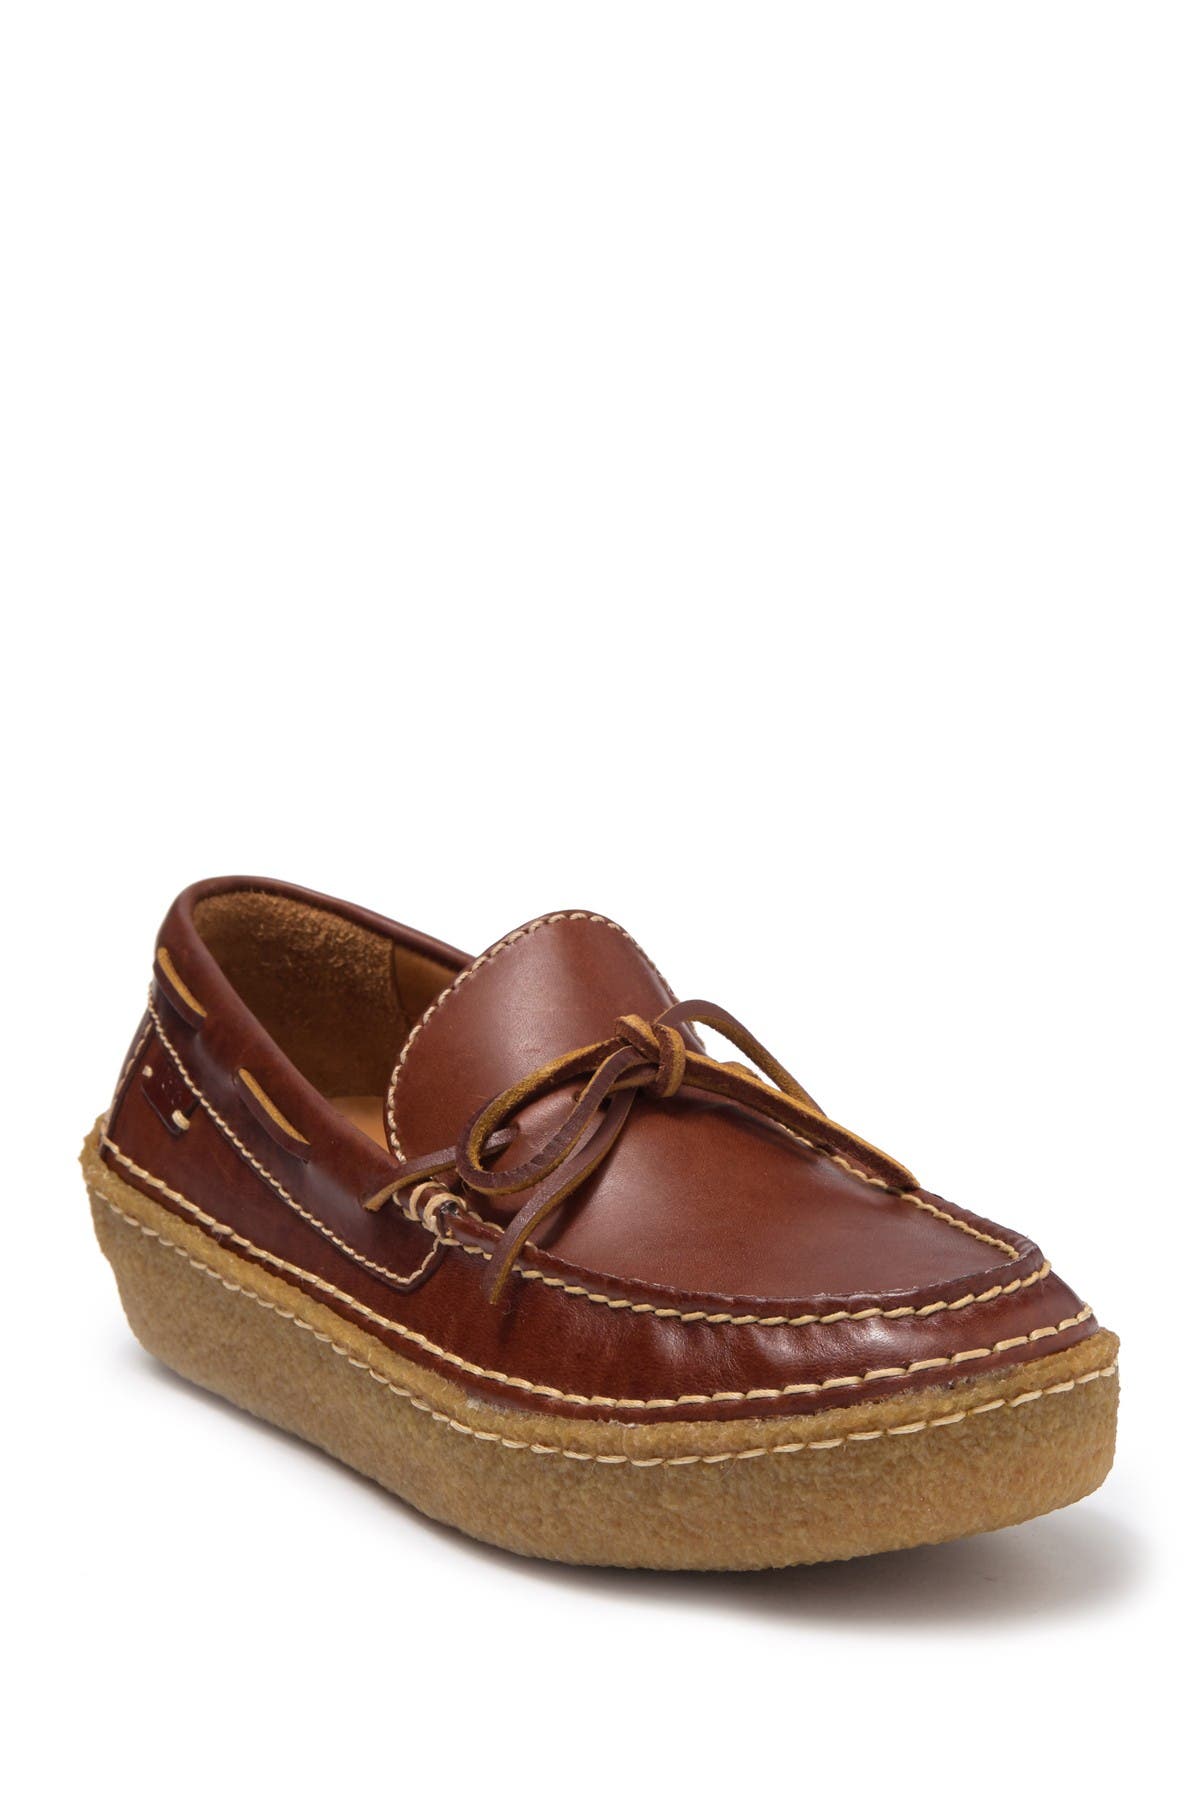 ralph lauren leather loafers